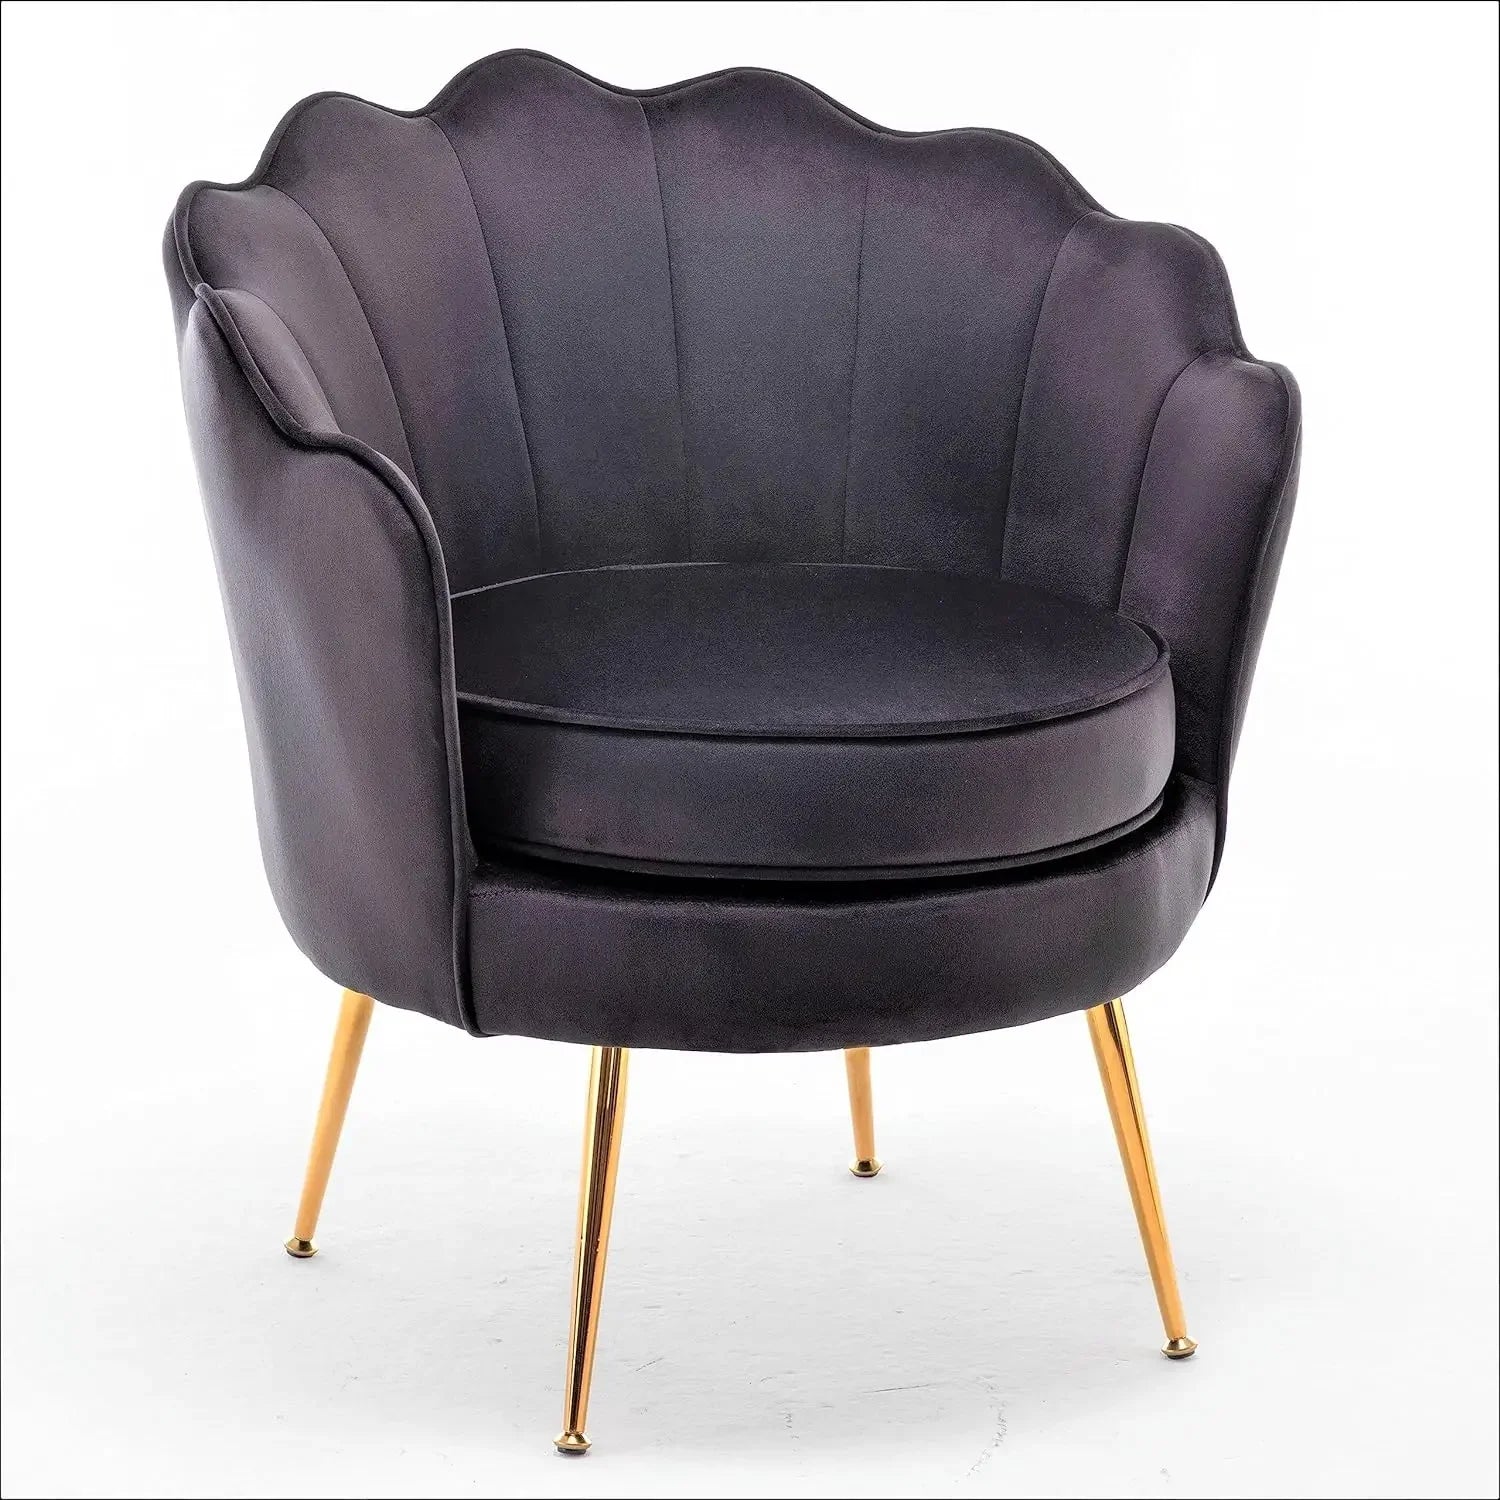 Furniture Direct Velvet Barrel Accent Chair With Scalloped Silhouette and Gold Metal Legs Chairs for Living Room Furniture Black - Farefe